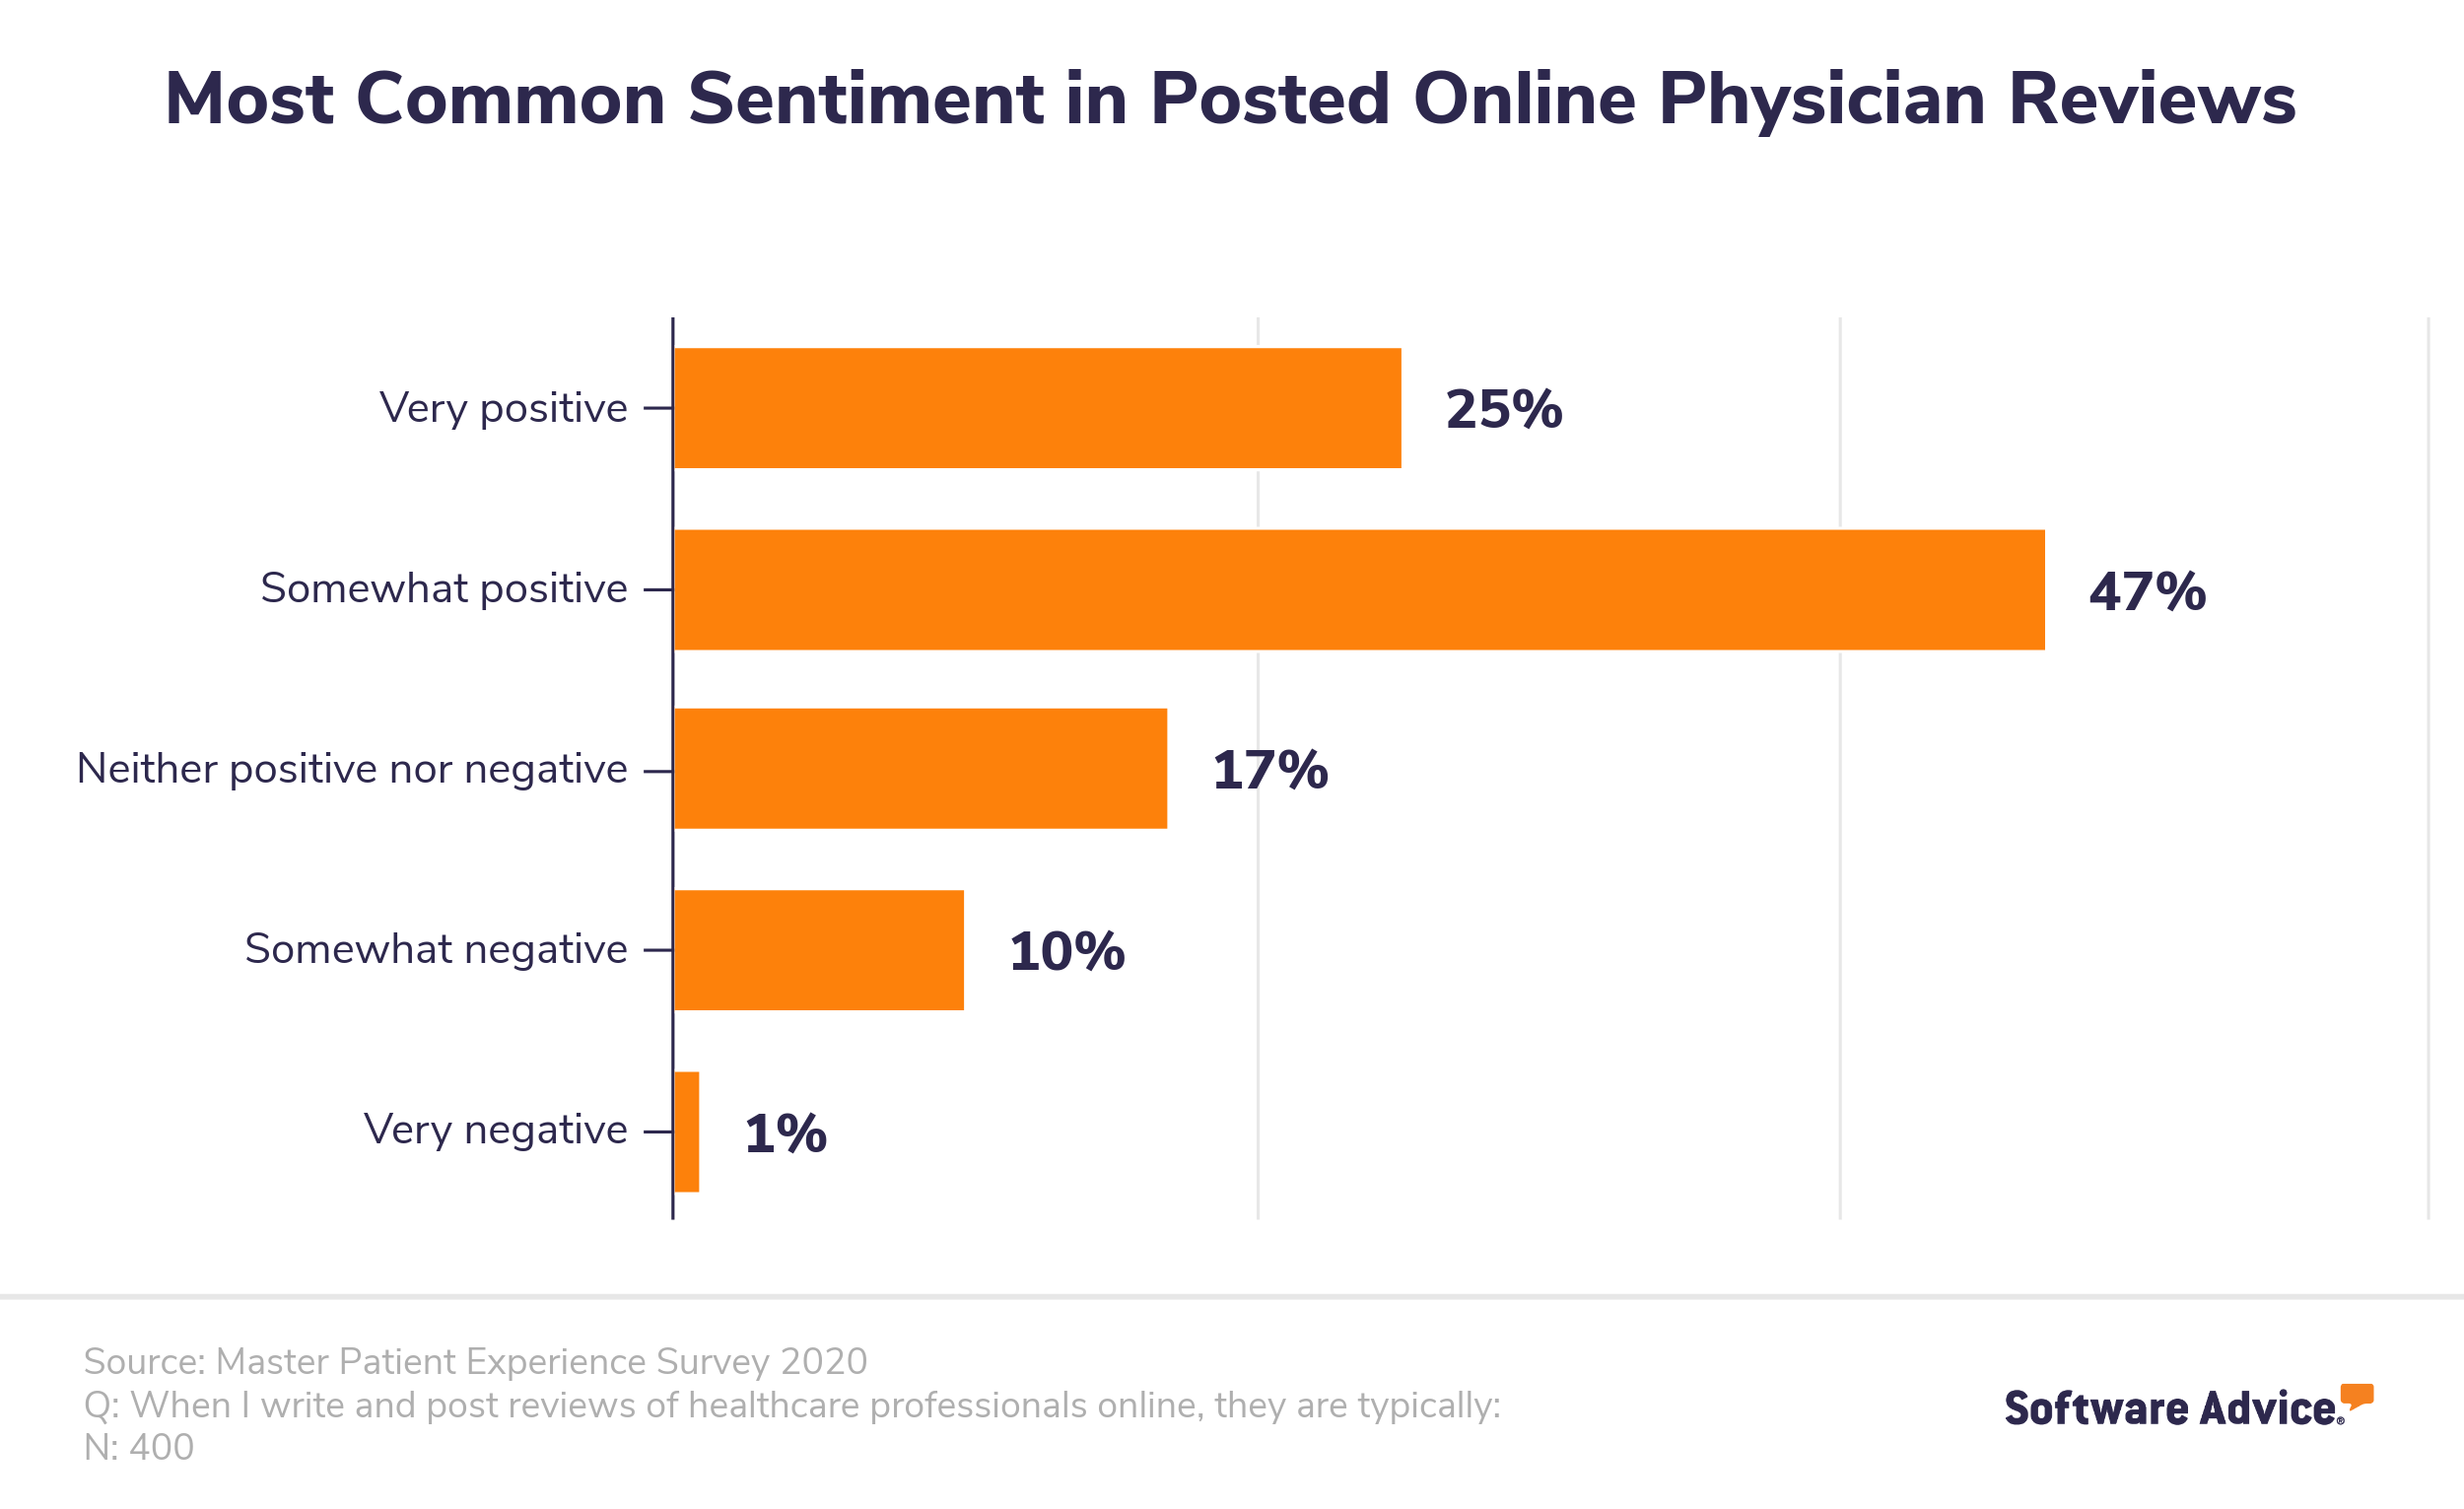 Most-common-sentiment-in-posted-online-physician-reviews.